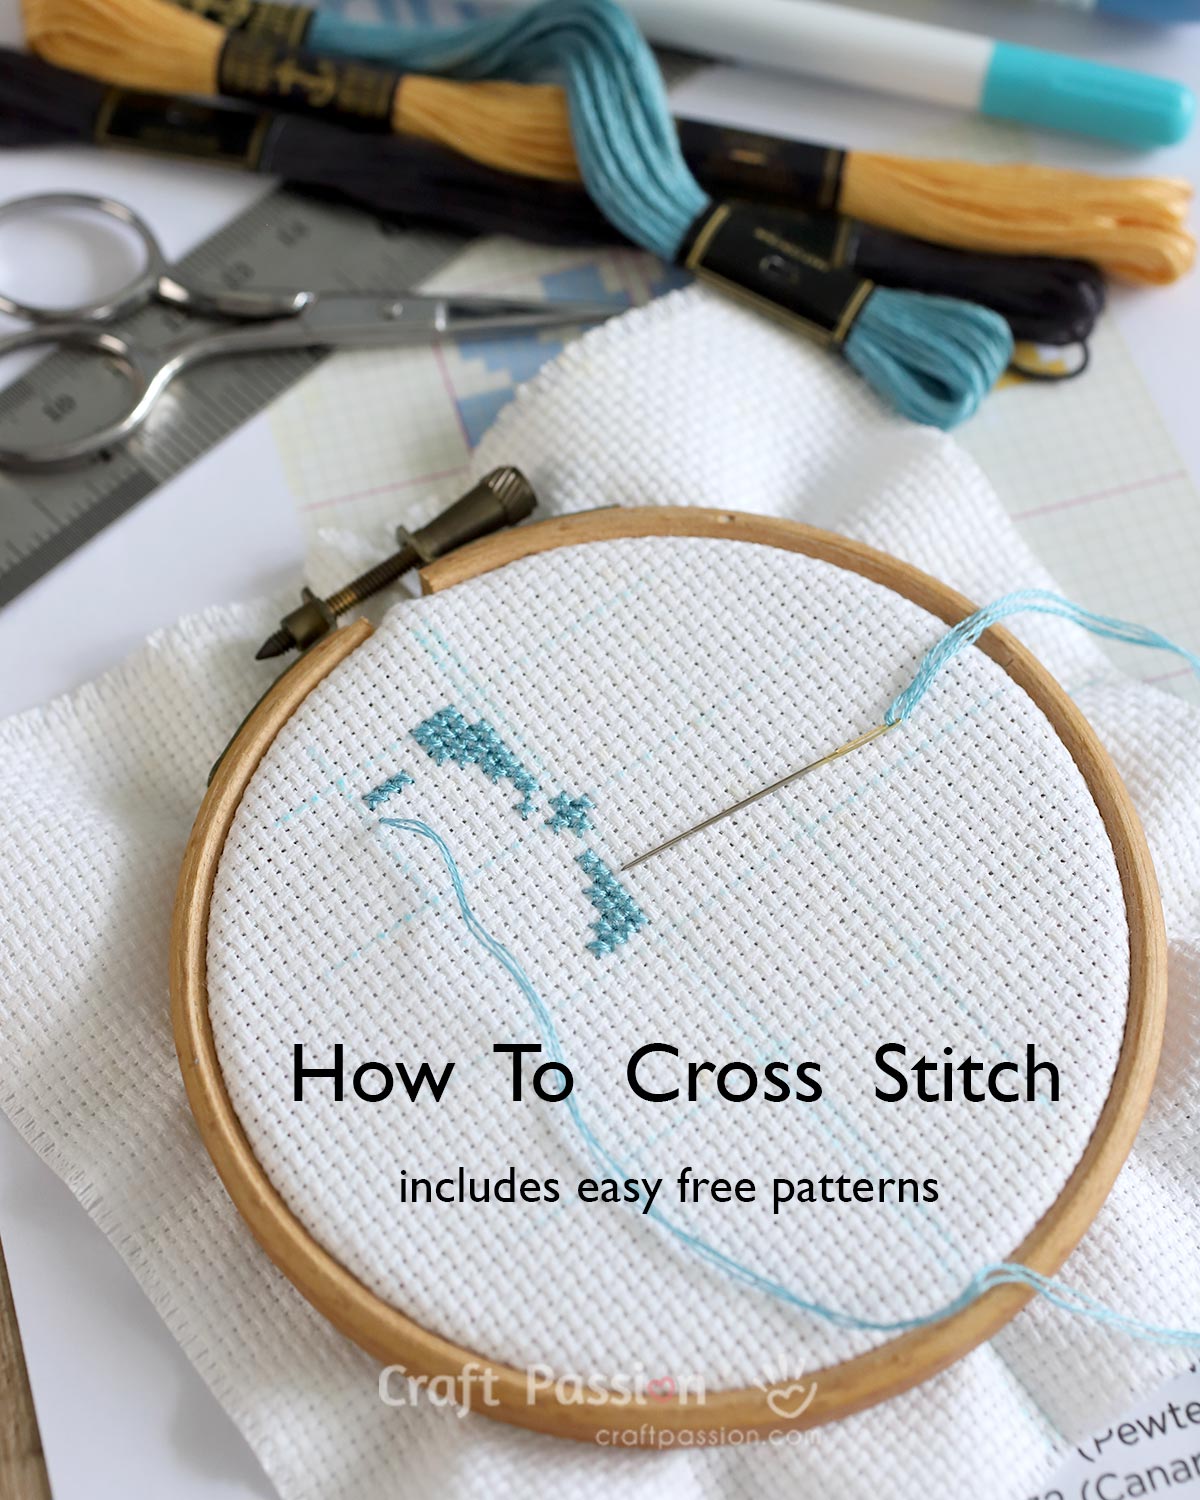 A beginner guide on how to sew cross stitch, includes 29 simple free patterns